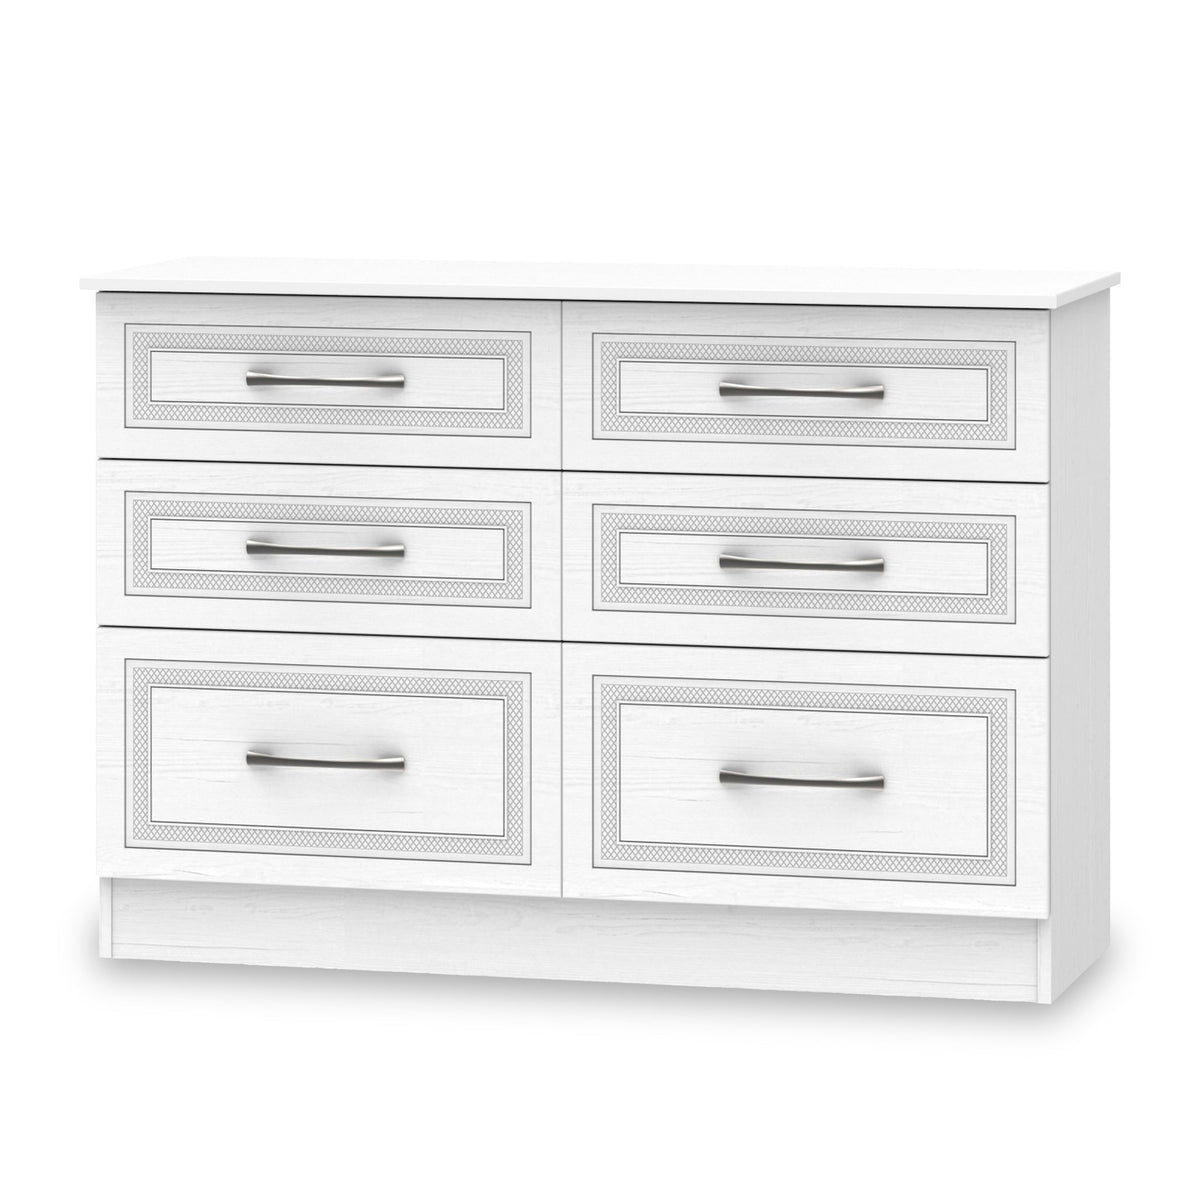 Killgarth White 6 Drawer Wide Chest from Roseland Furniture